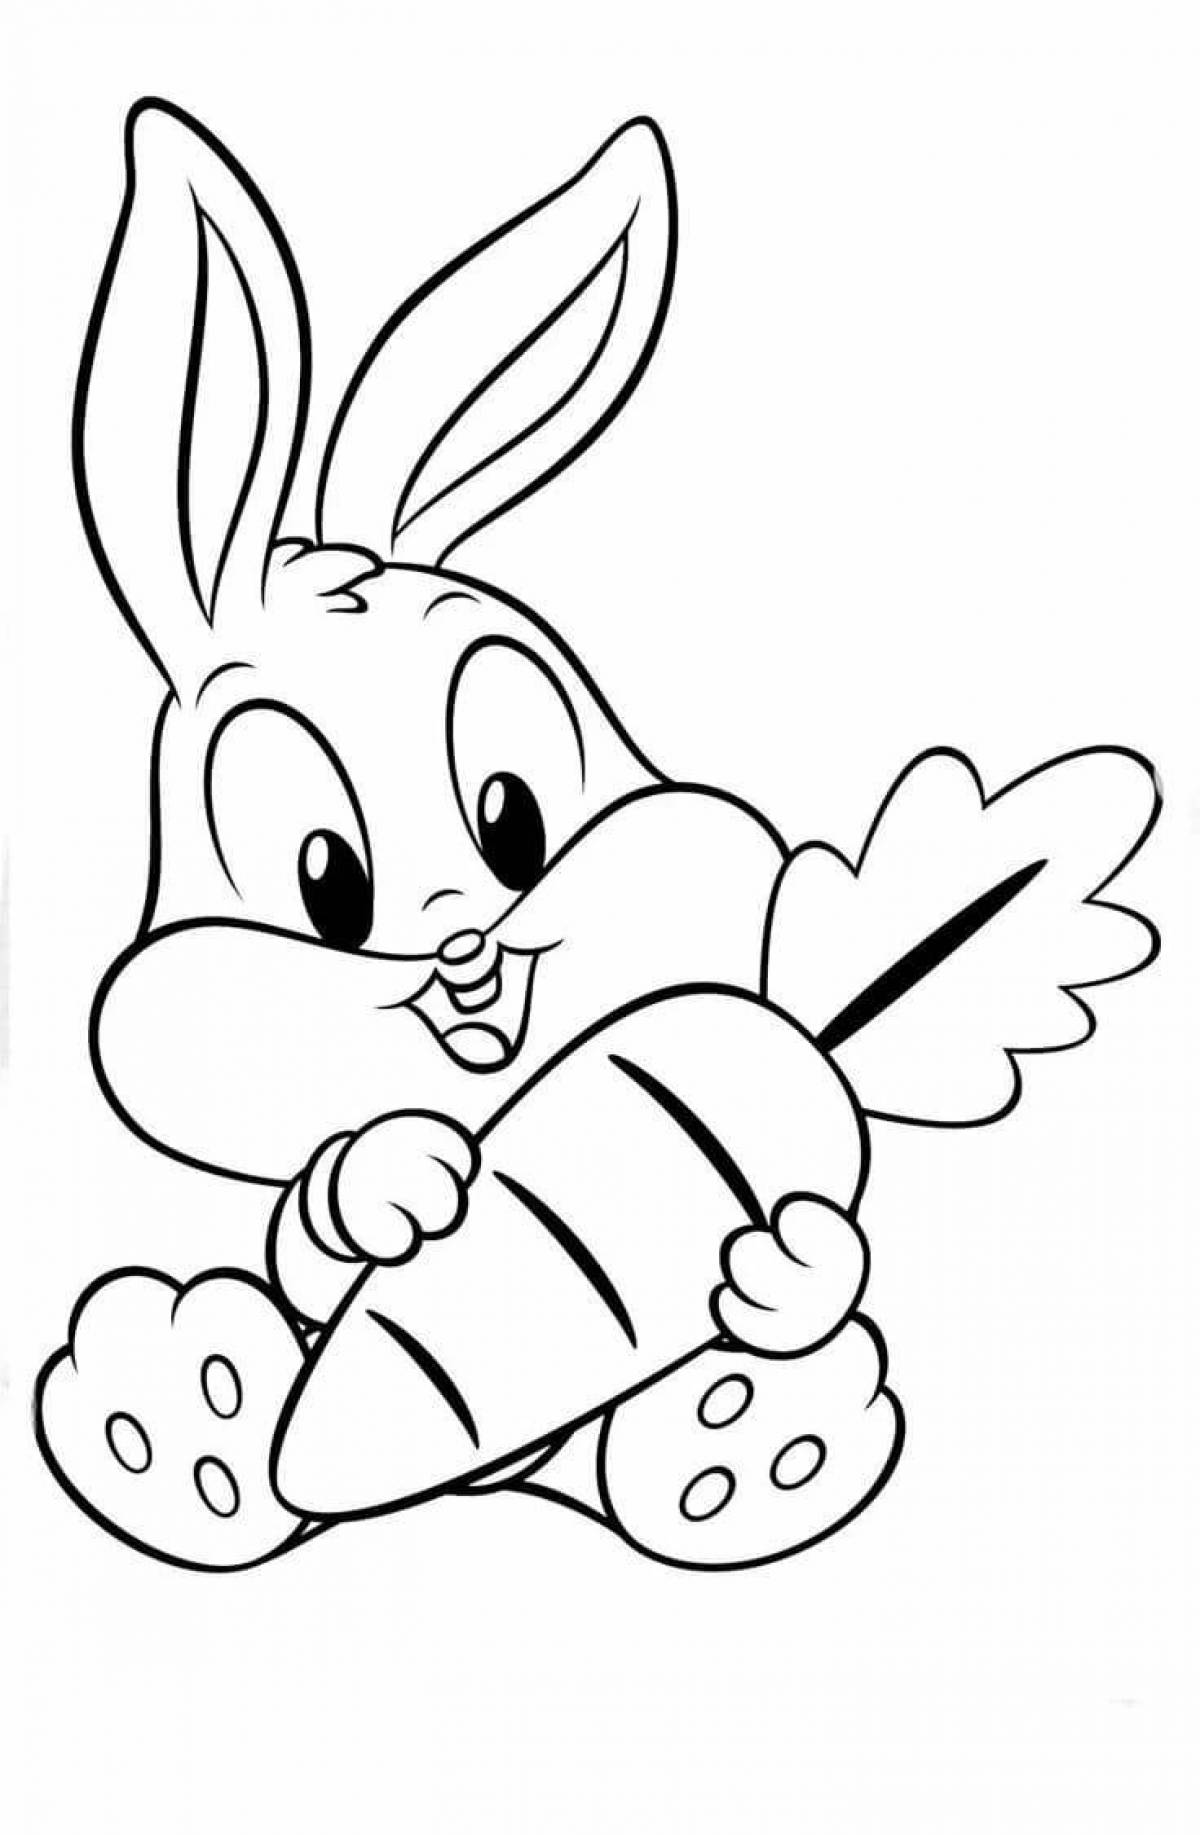 Playful rabbit coloring book for children 3-4 years old